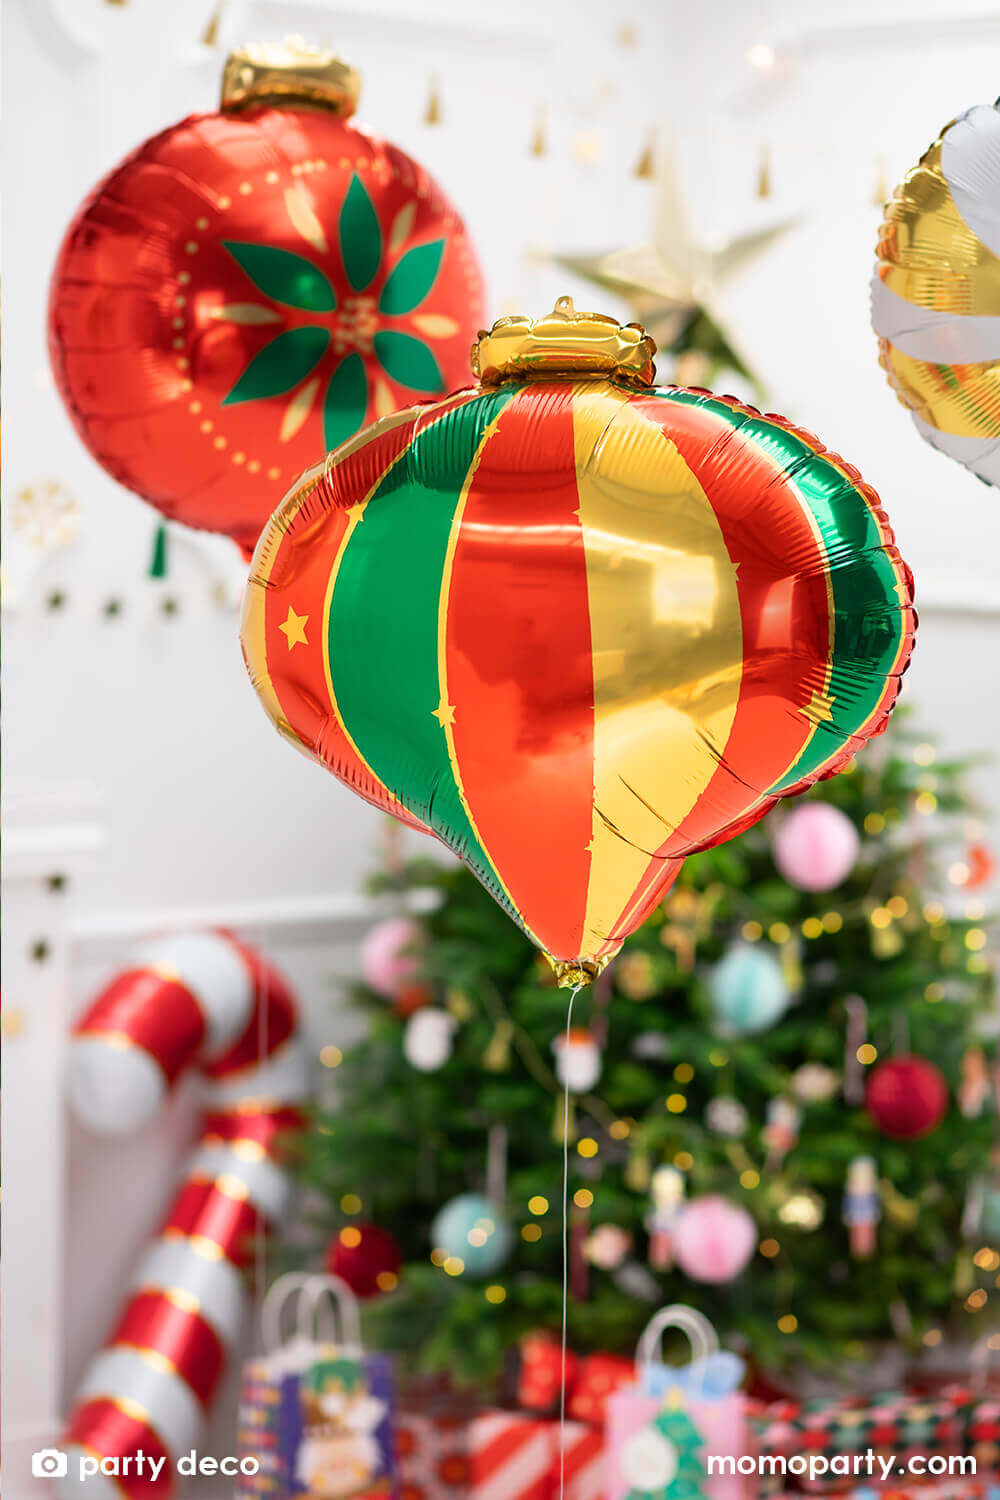 Holiday home decoration with Festive Christmas Ornament Foil Balloon in a classic teardrop shape ornament with green, red and gold color, and Red Christmas Ornament Foil Balloon in the middle of the room, there are christmas tree decorated with lots of ornaments, lights, gifts under it for a holiday celebration.